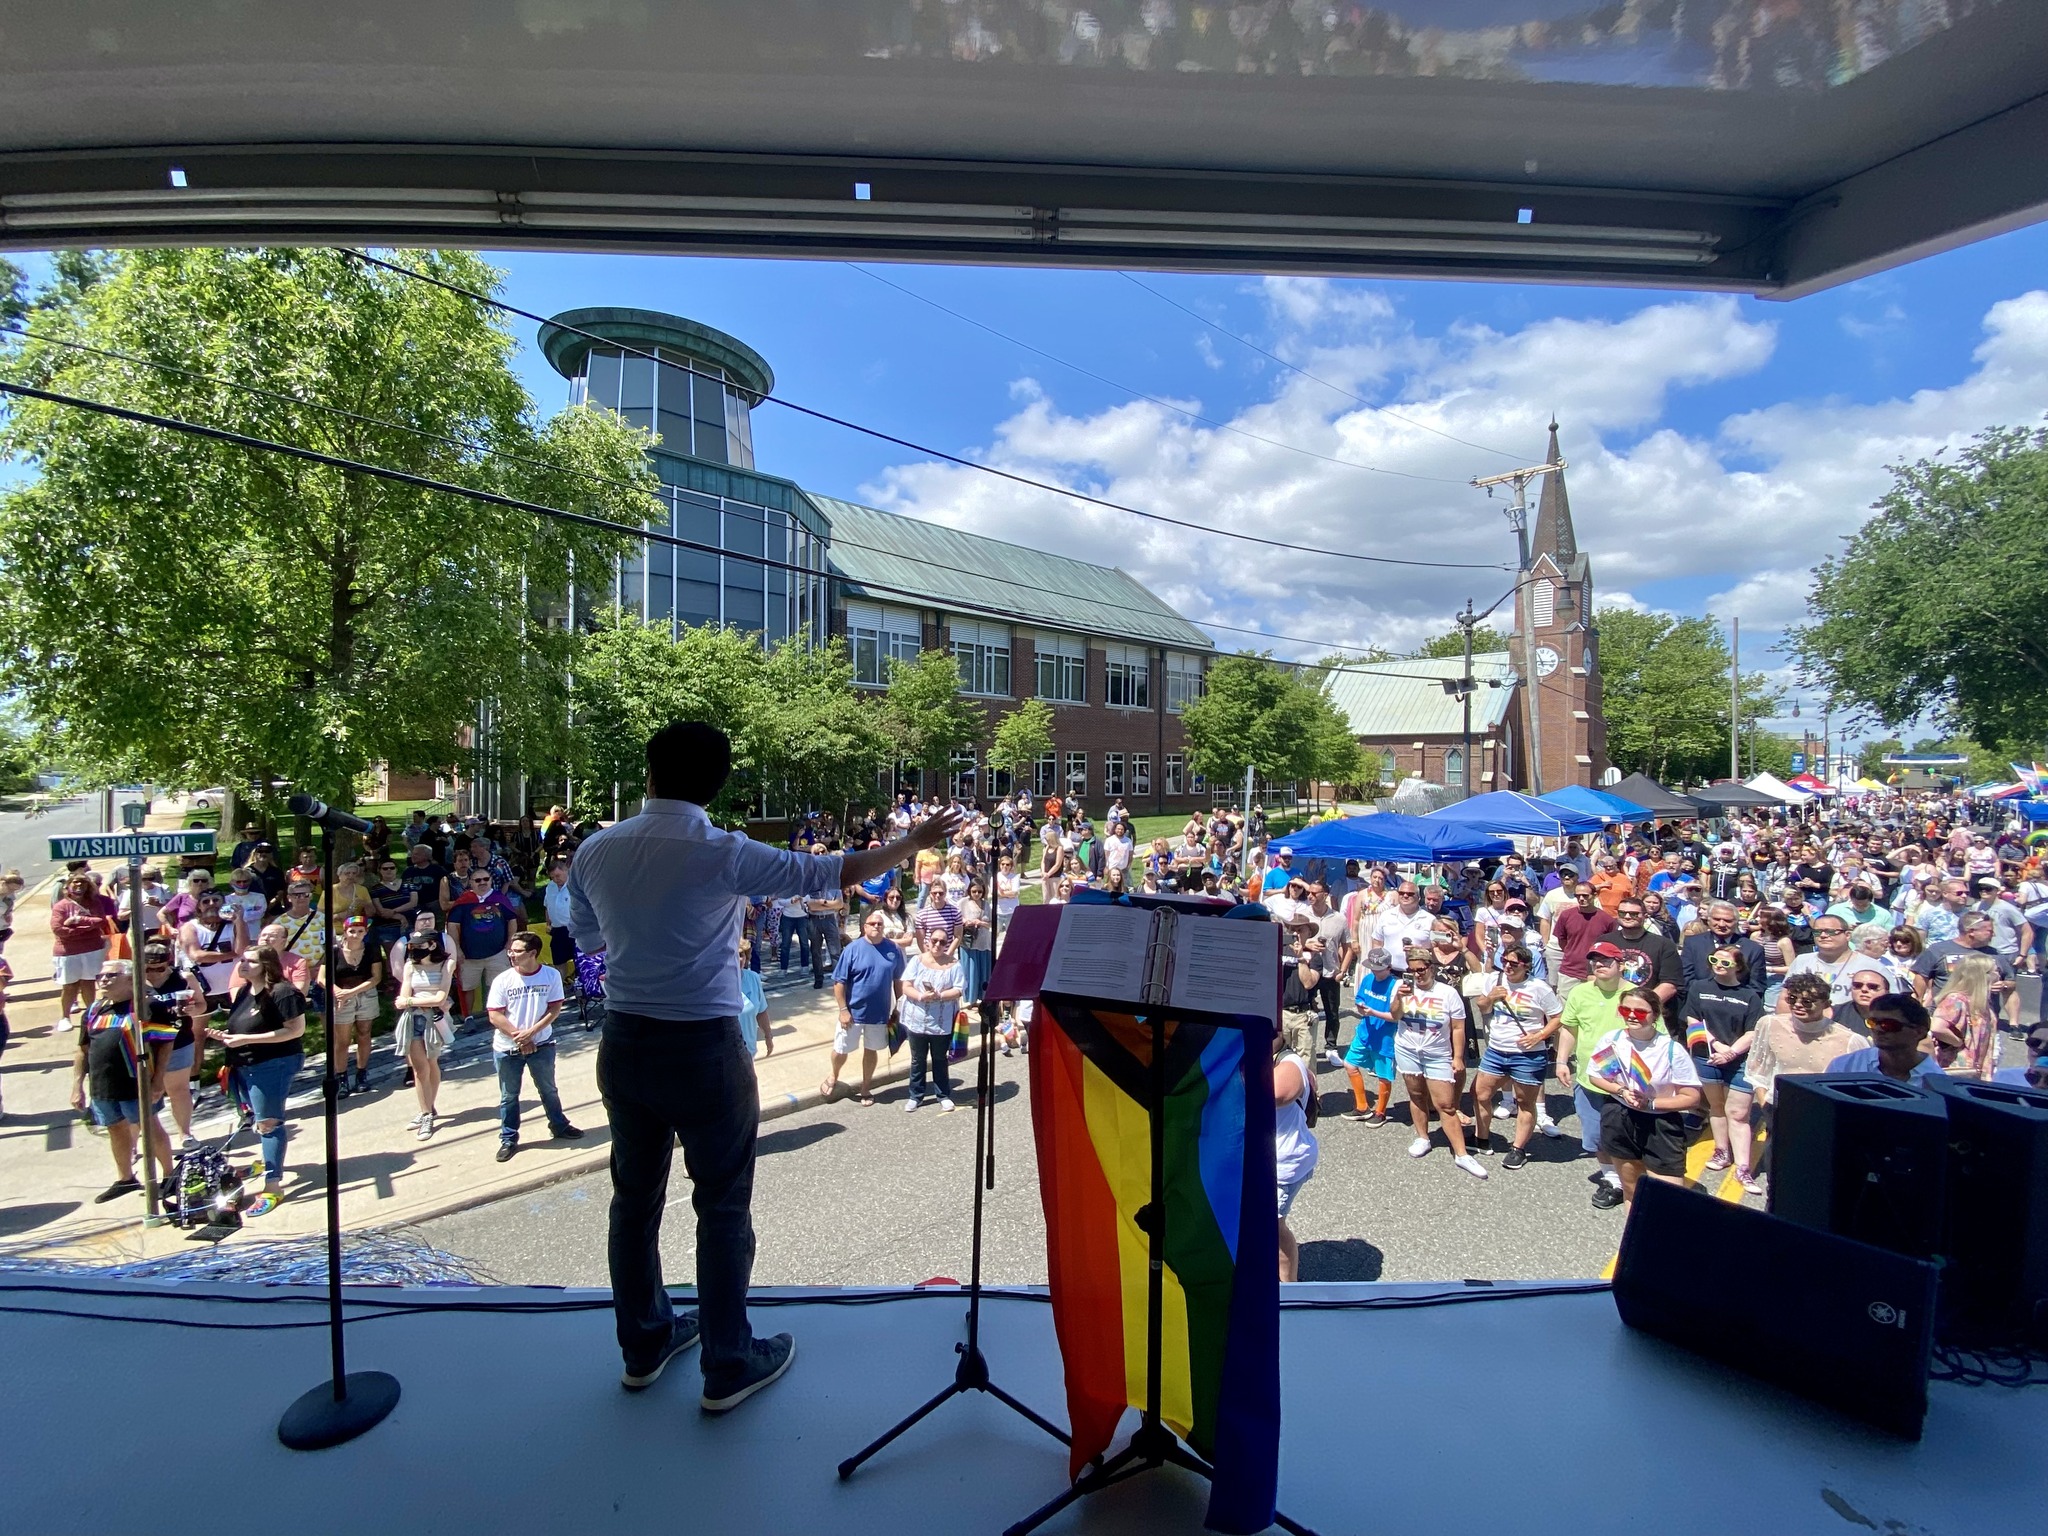 view from stage looking out at crowd during pride festival